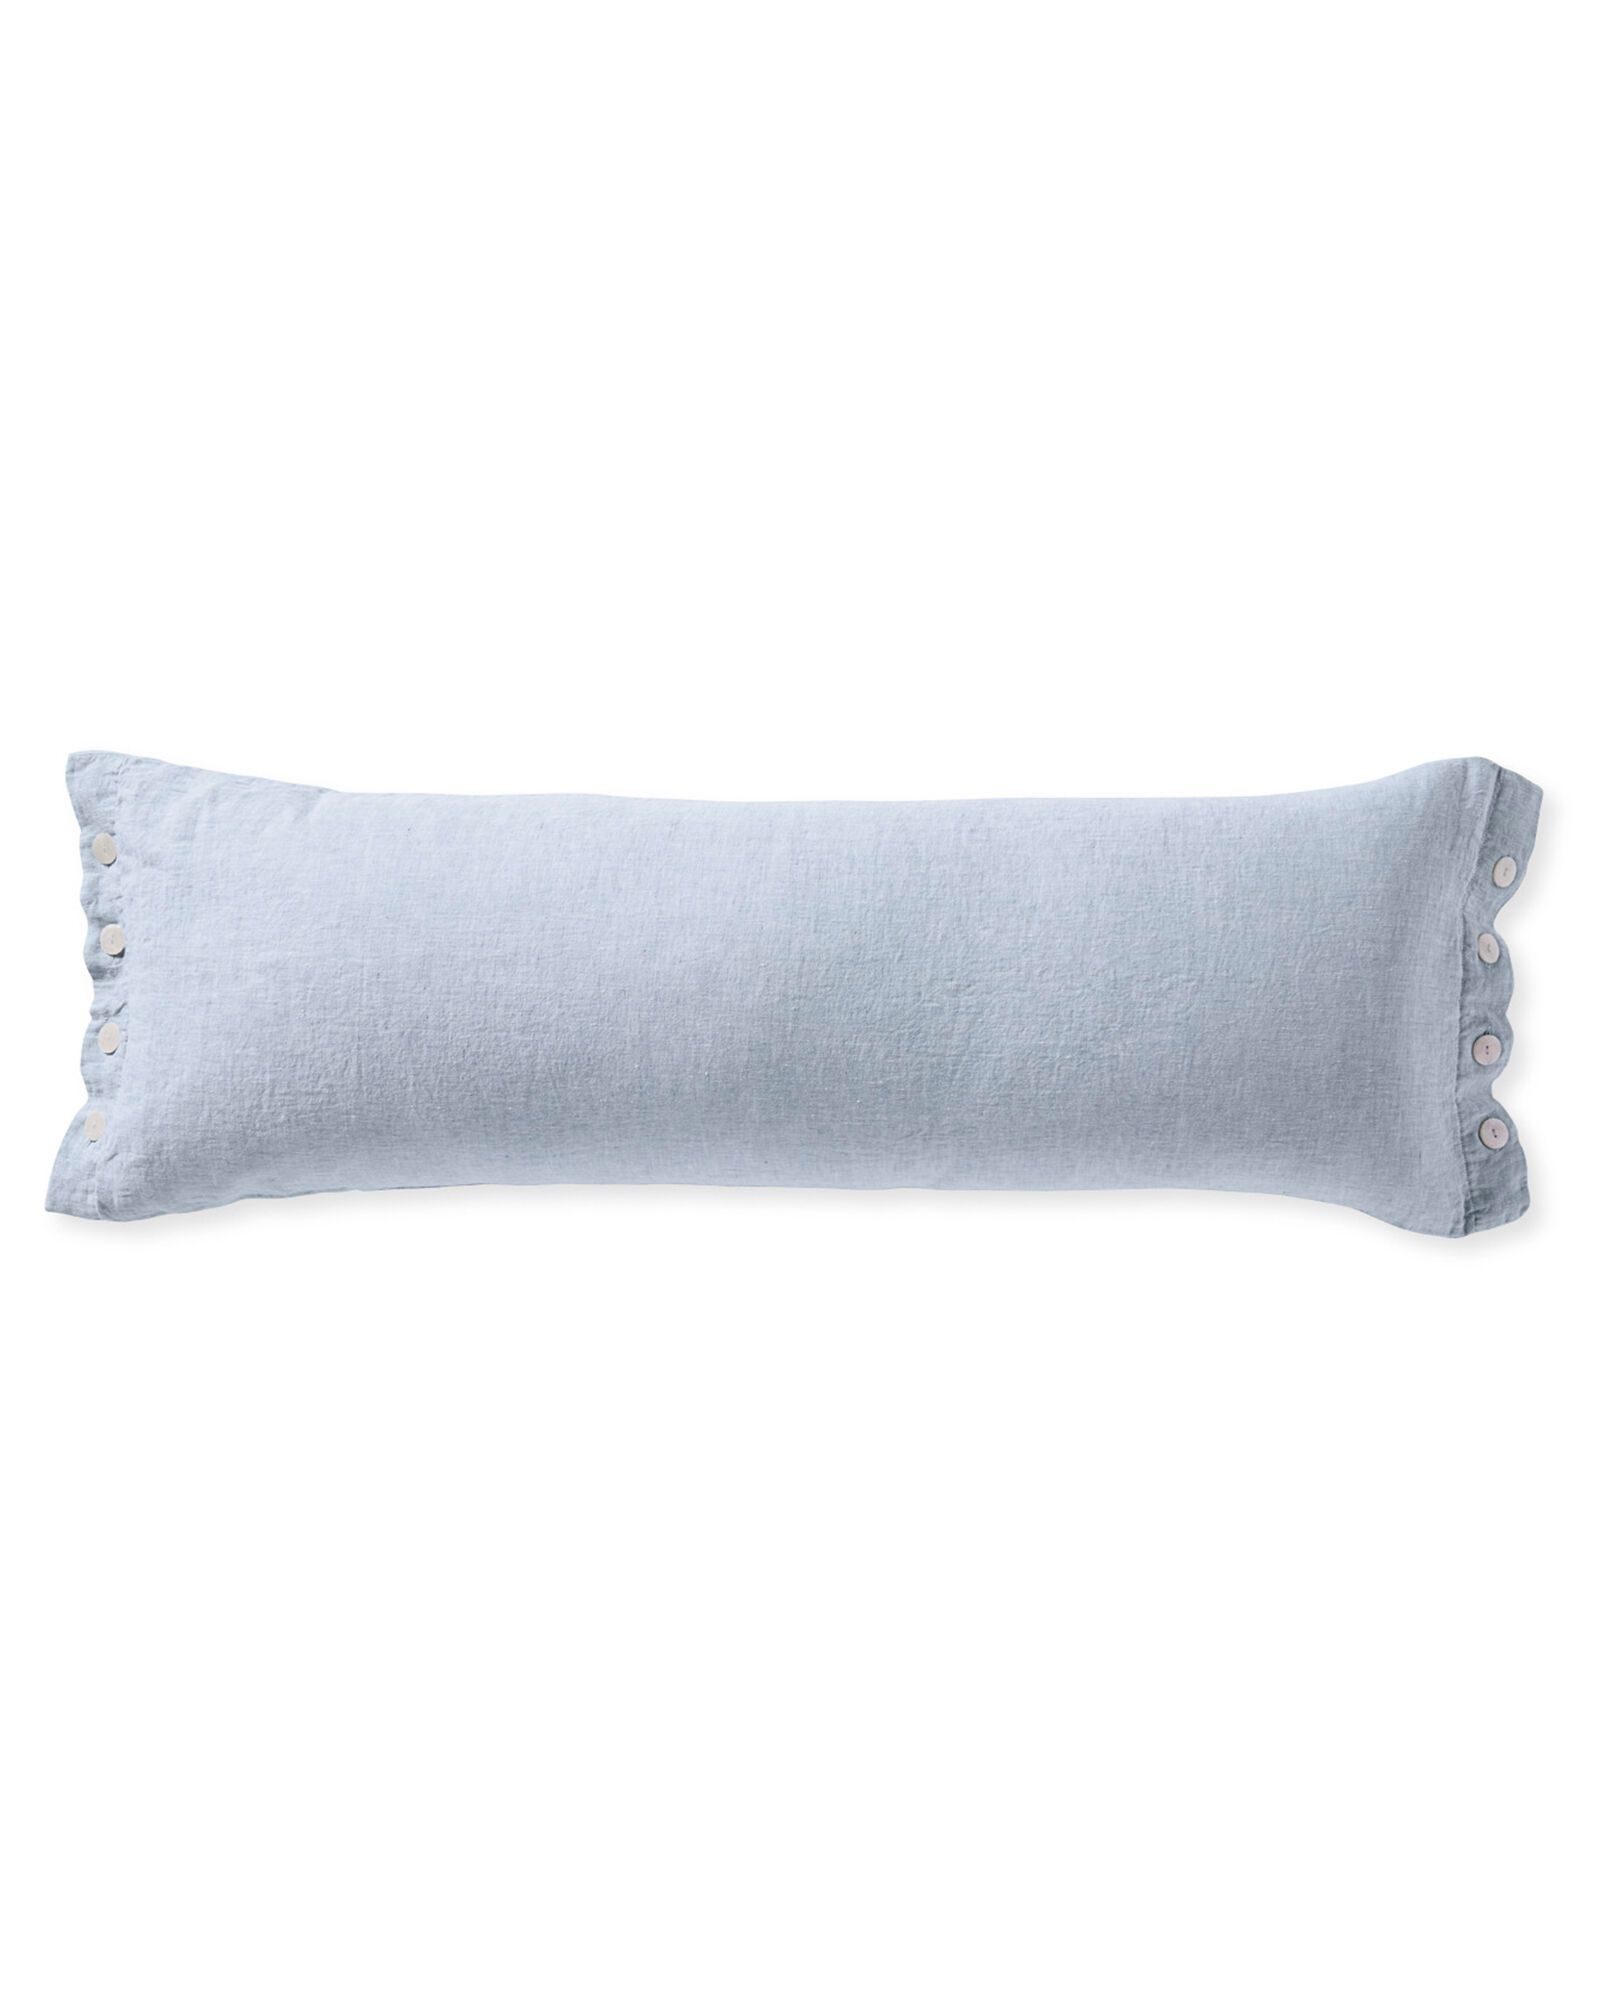 Boothbay Pillow Cover | Serena and Lily